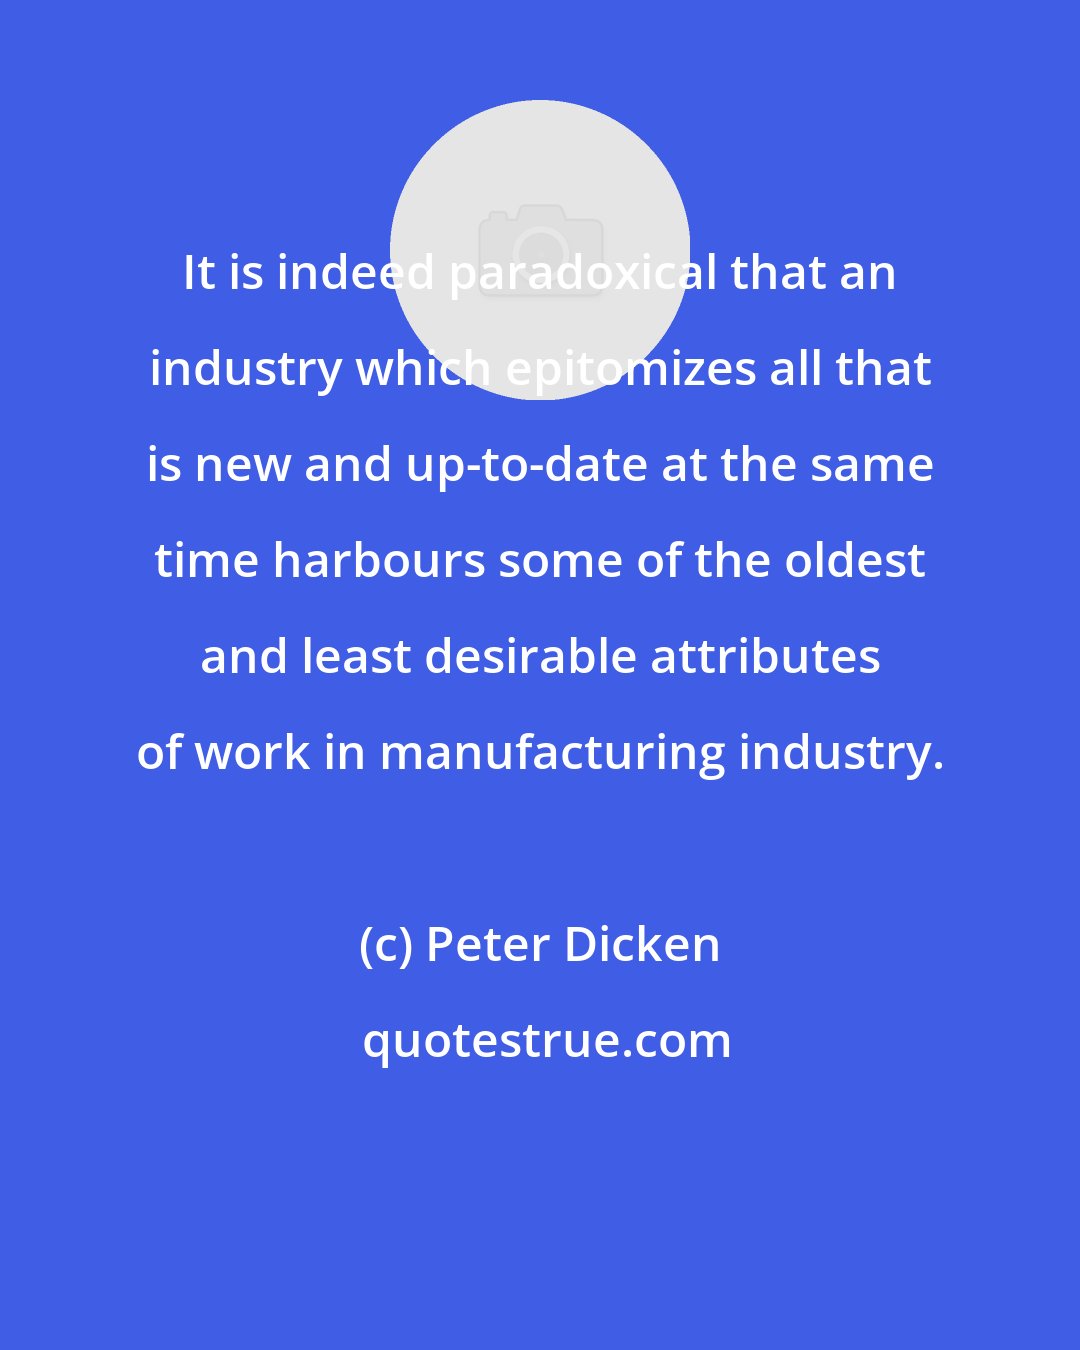 Peter Dicken: It is indeed paradoxical that an industry which epitomizes all that is new and up-to-date at the same time harbours some of the oldest and least desirable attributes of work in manufacturing industry.